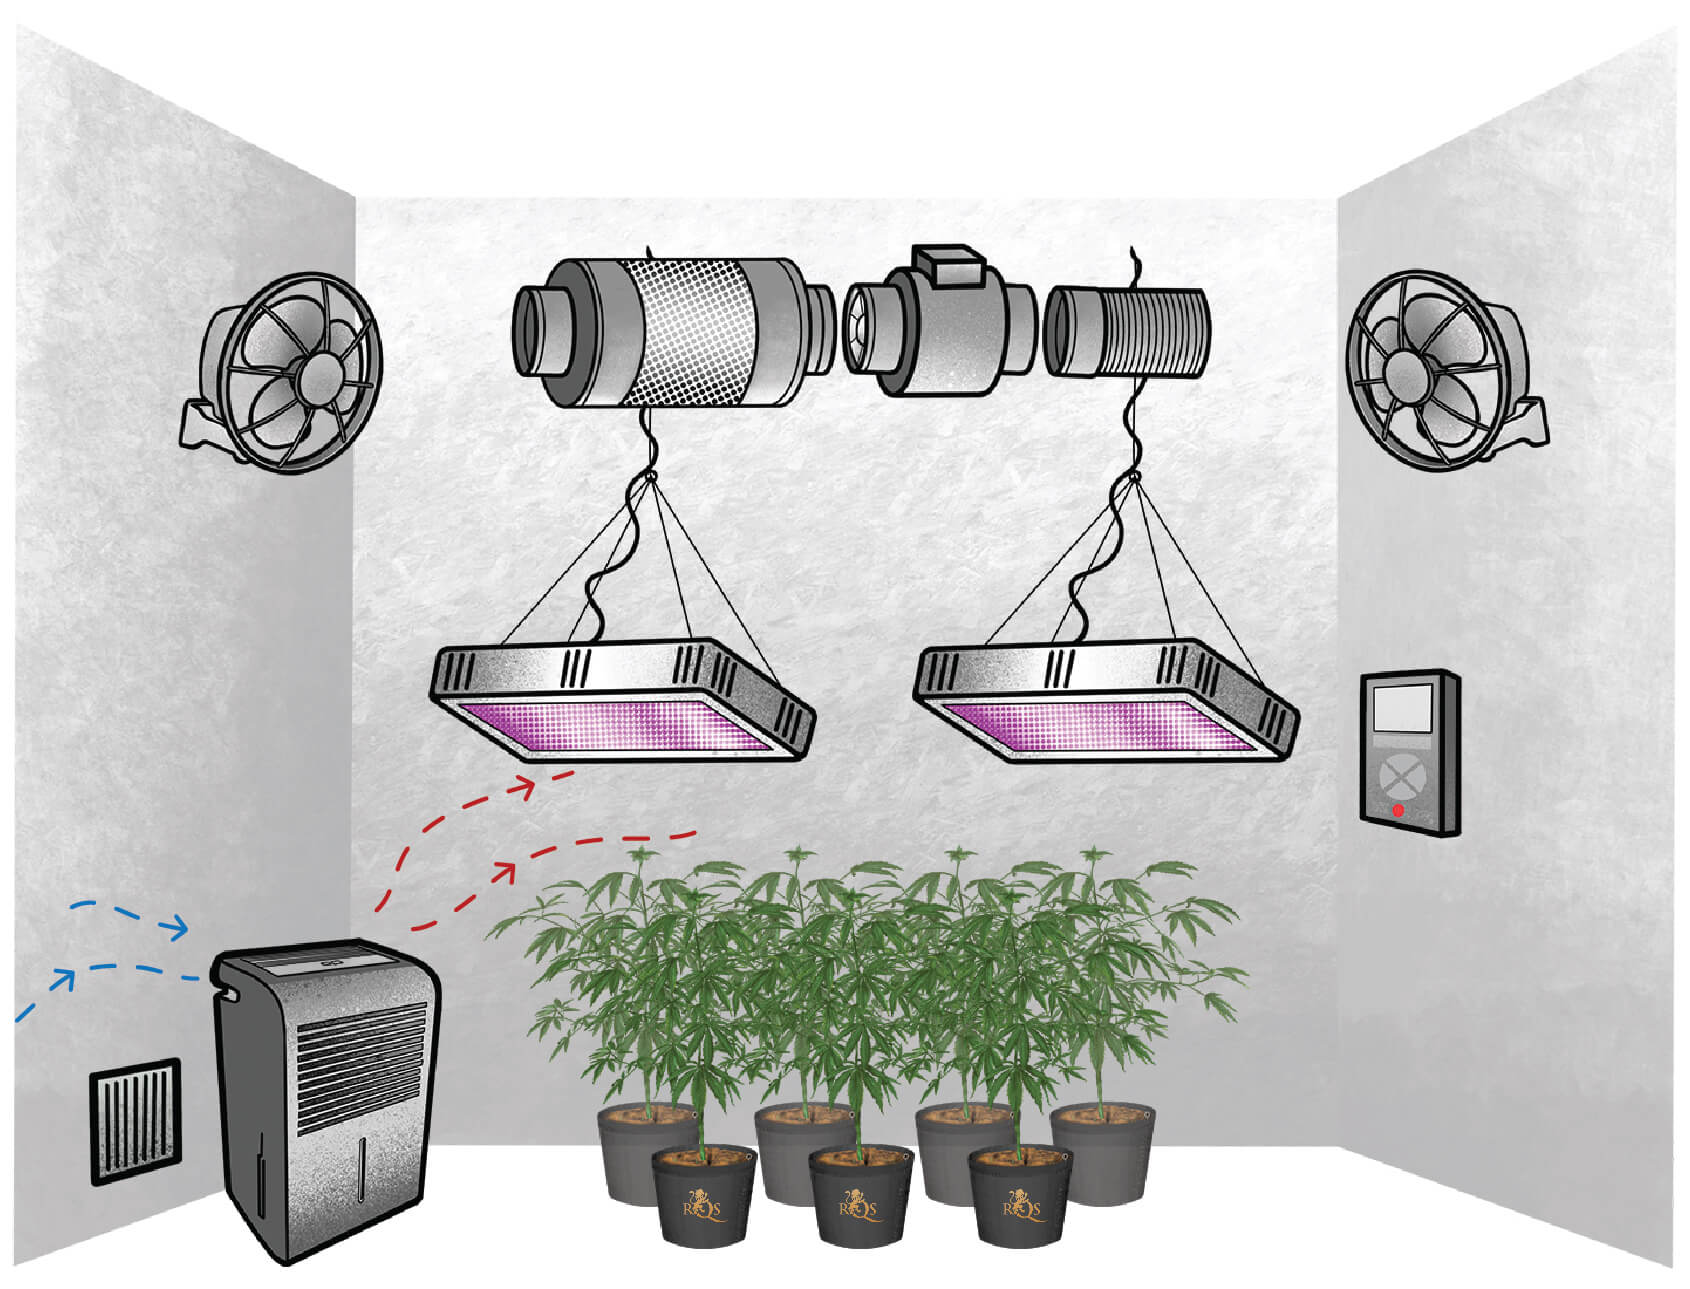 Dehumidifiers: Why You Need One To Grow Great Cannabis - RQS Blog